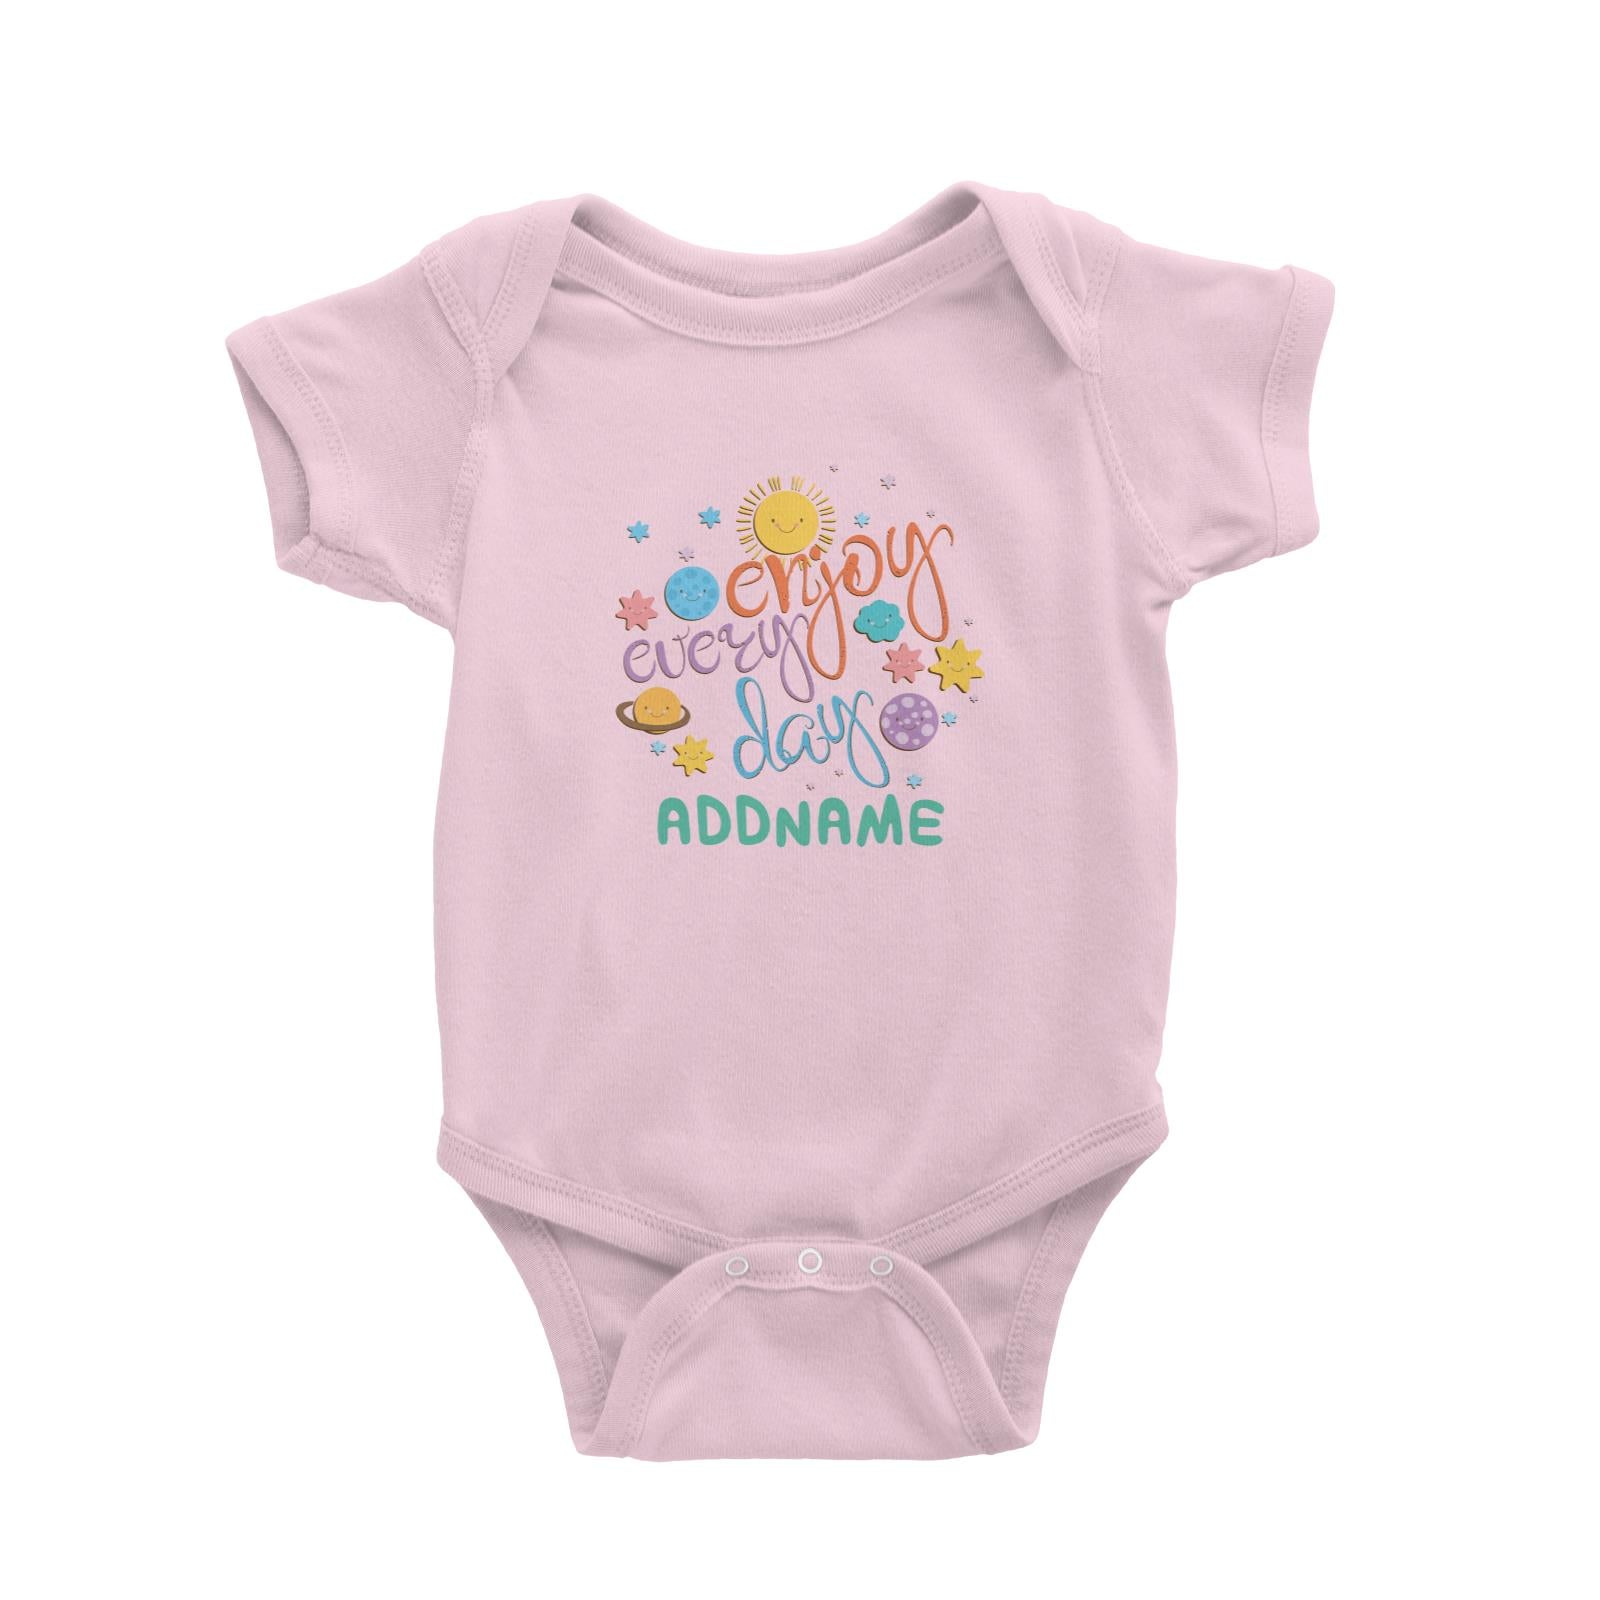 Children's Day Gift Series Enjoy Every Day Space Addname Baby Romper